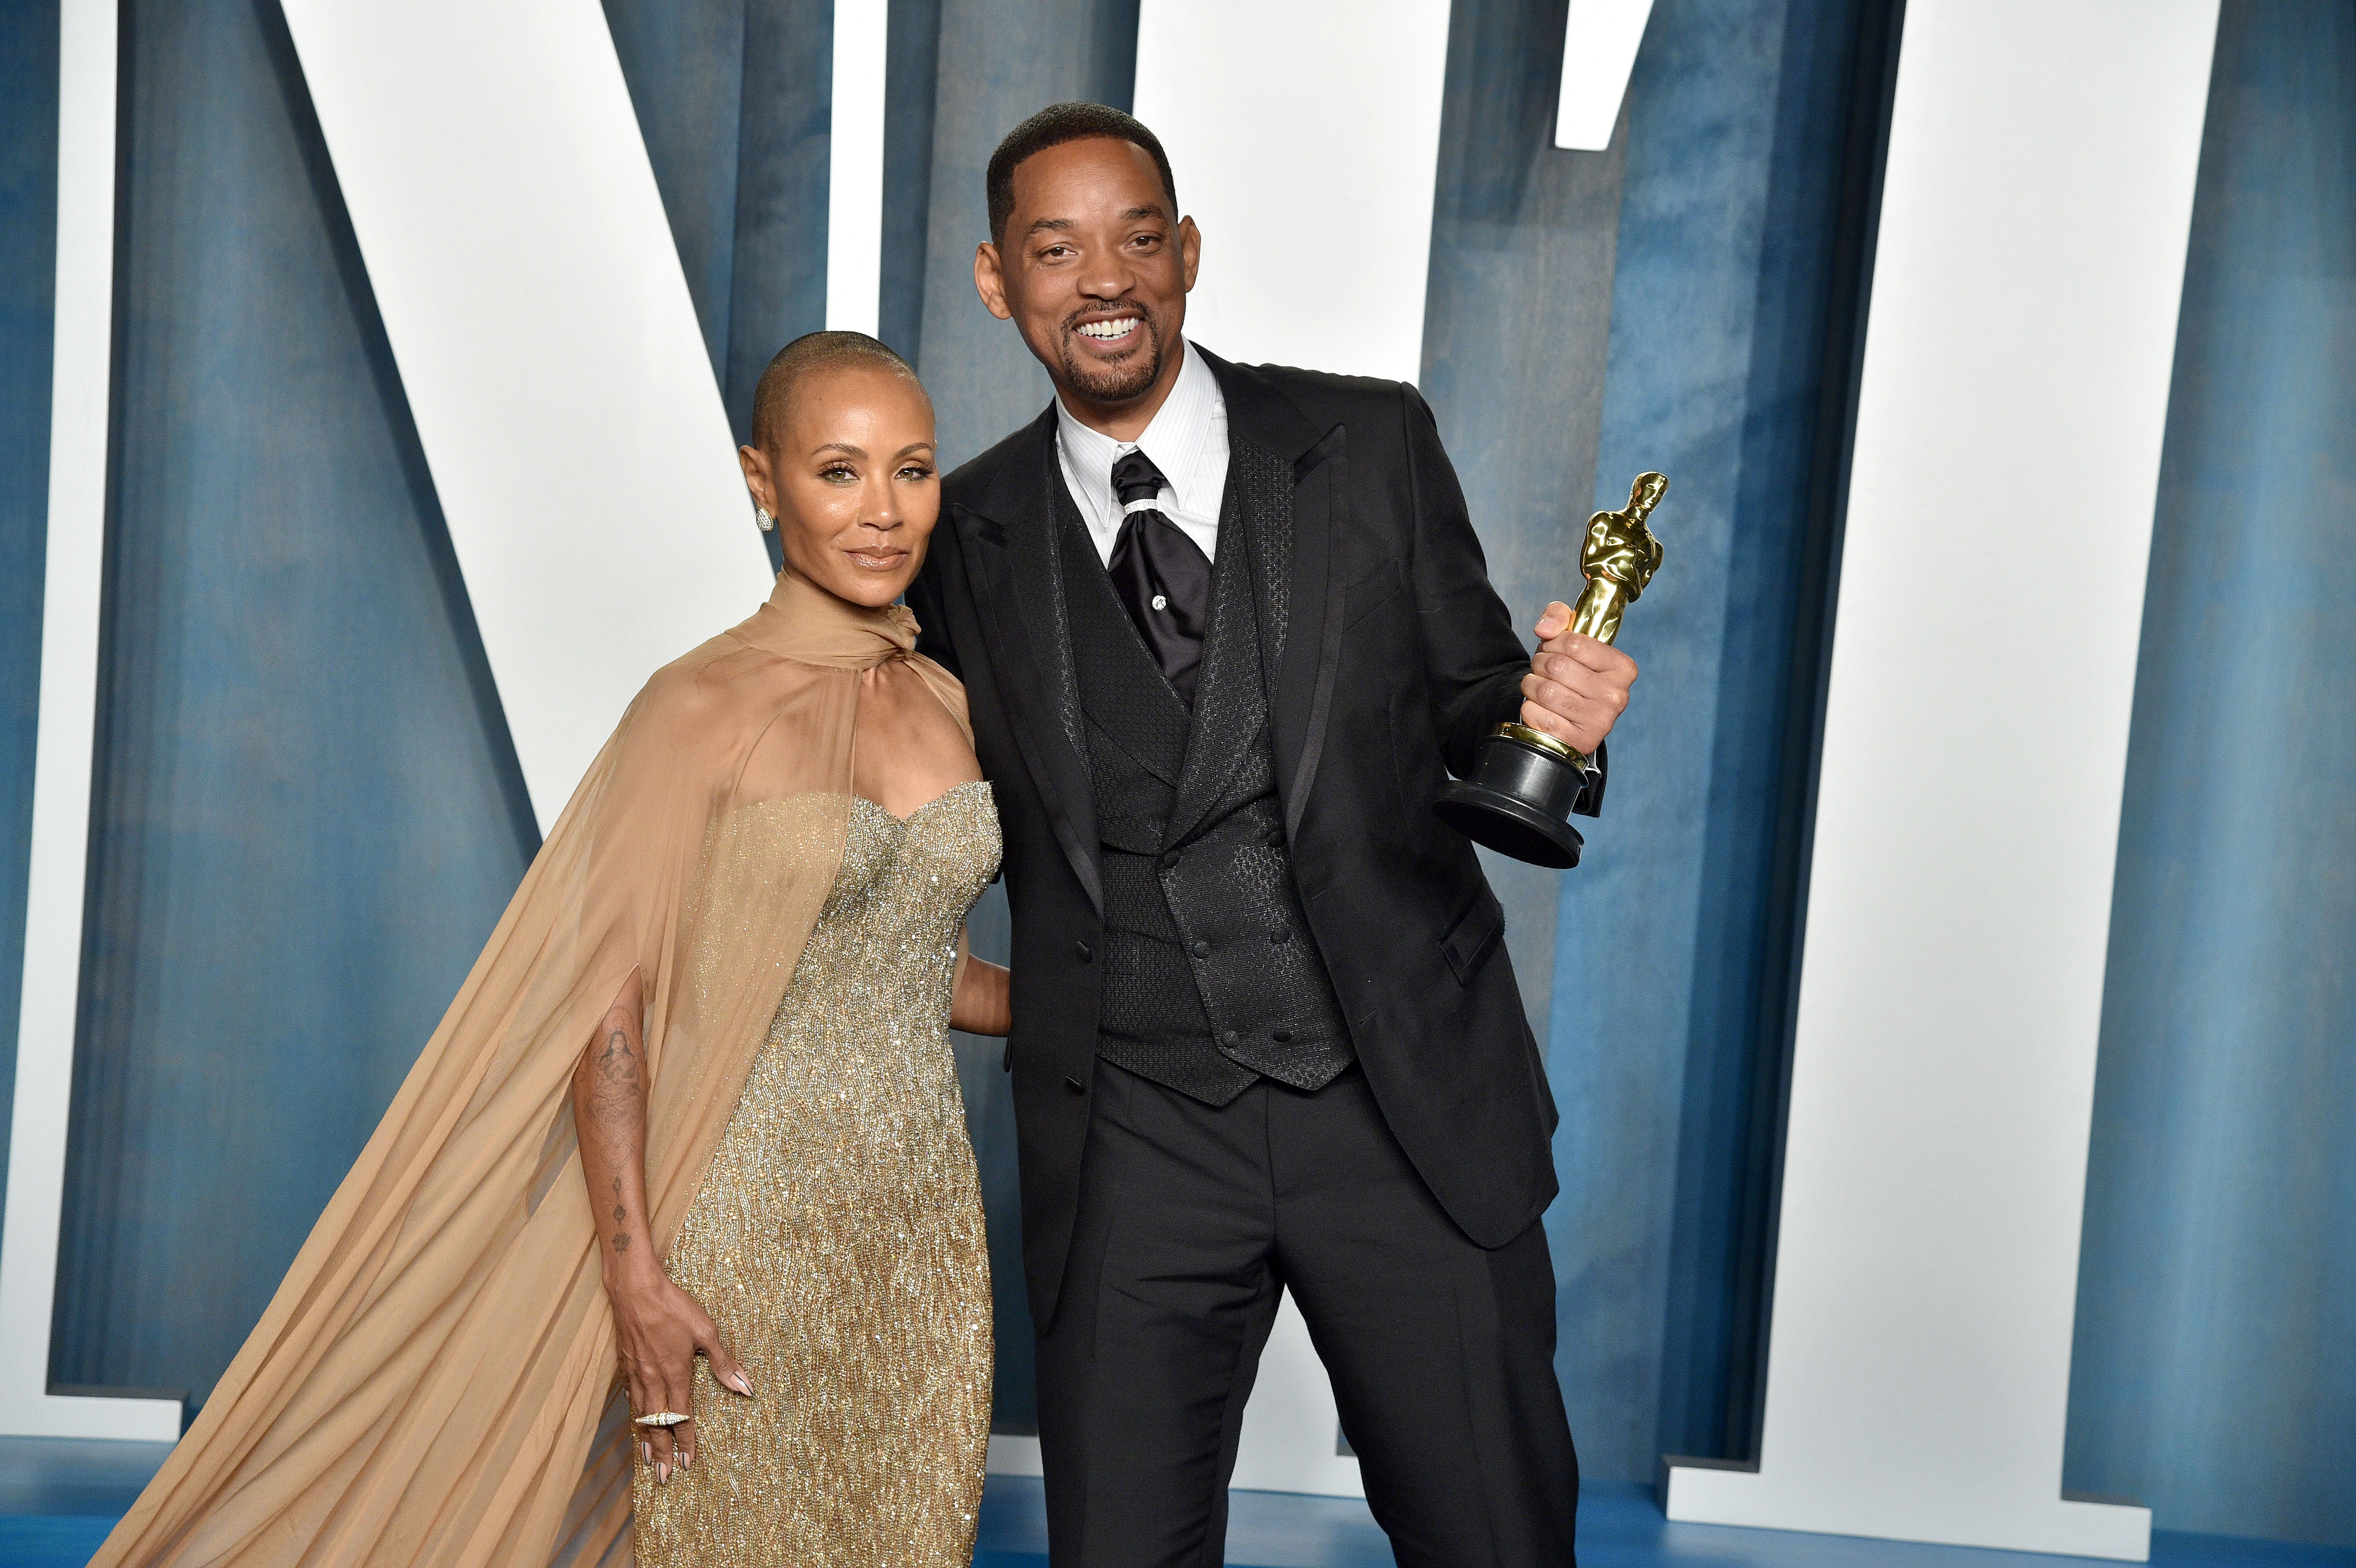 Jada Pinkett-Smith and Will Smith attending the 2022 Vanity Fair Oscar party on March 27, 2022 in Beverly Hills, California | Source: Getty Images